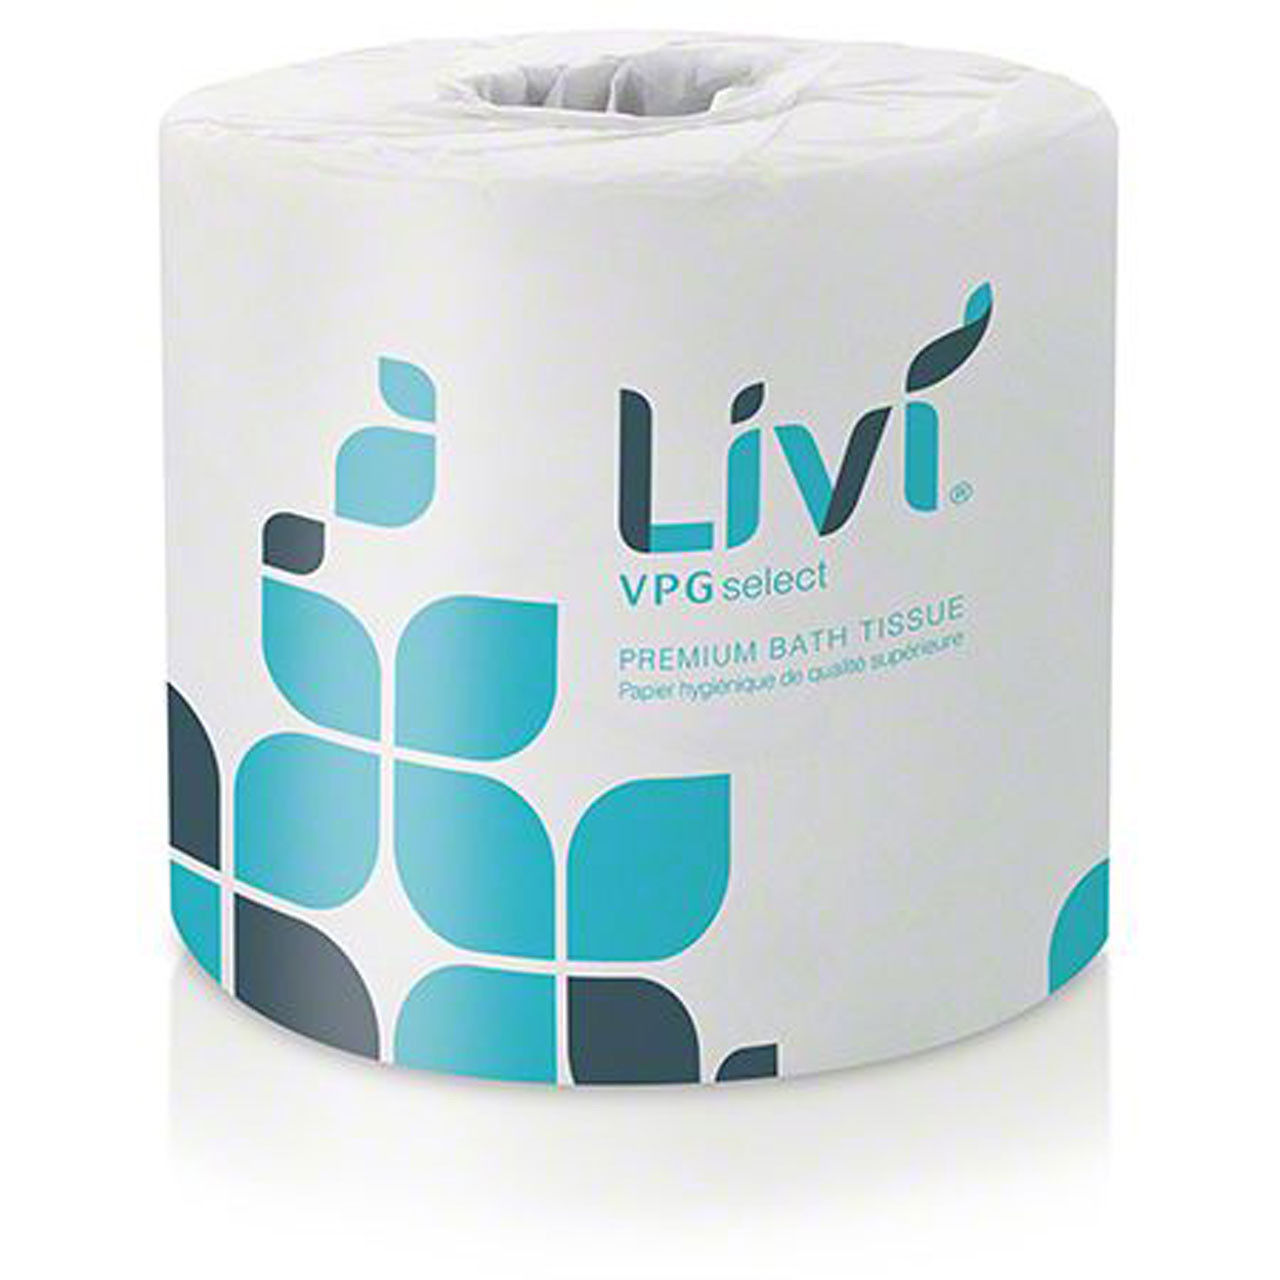 Solaris Paper Livi VPG Select Toilet Tissue 2/ply Questions & Answers